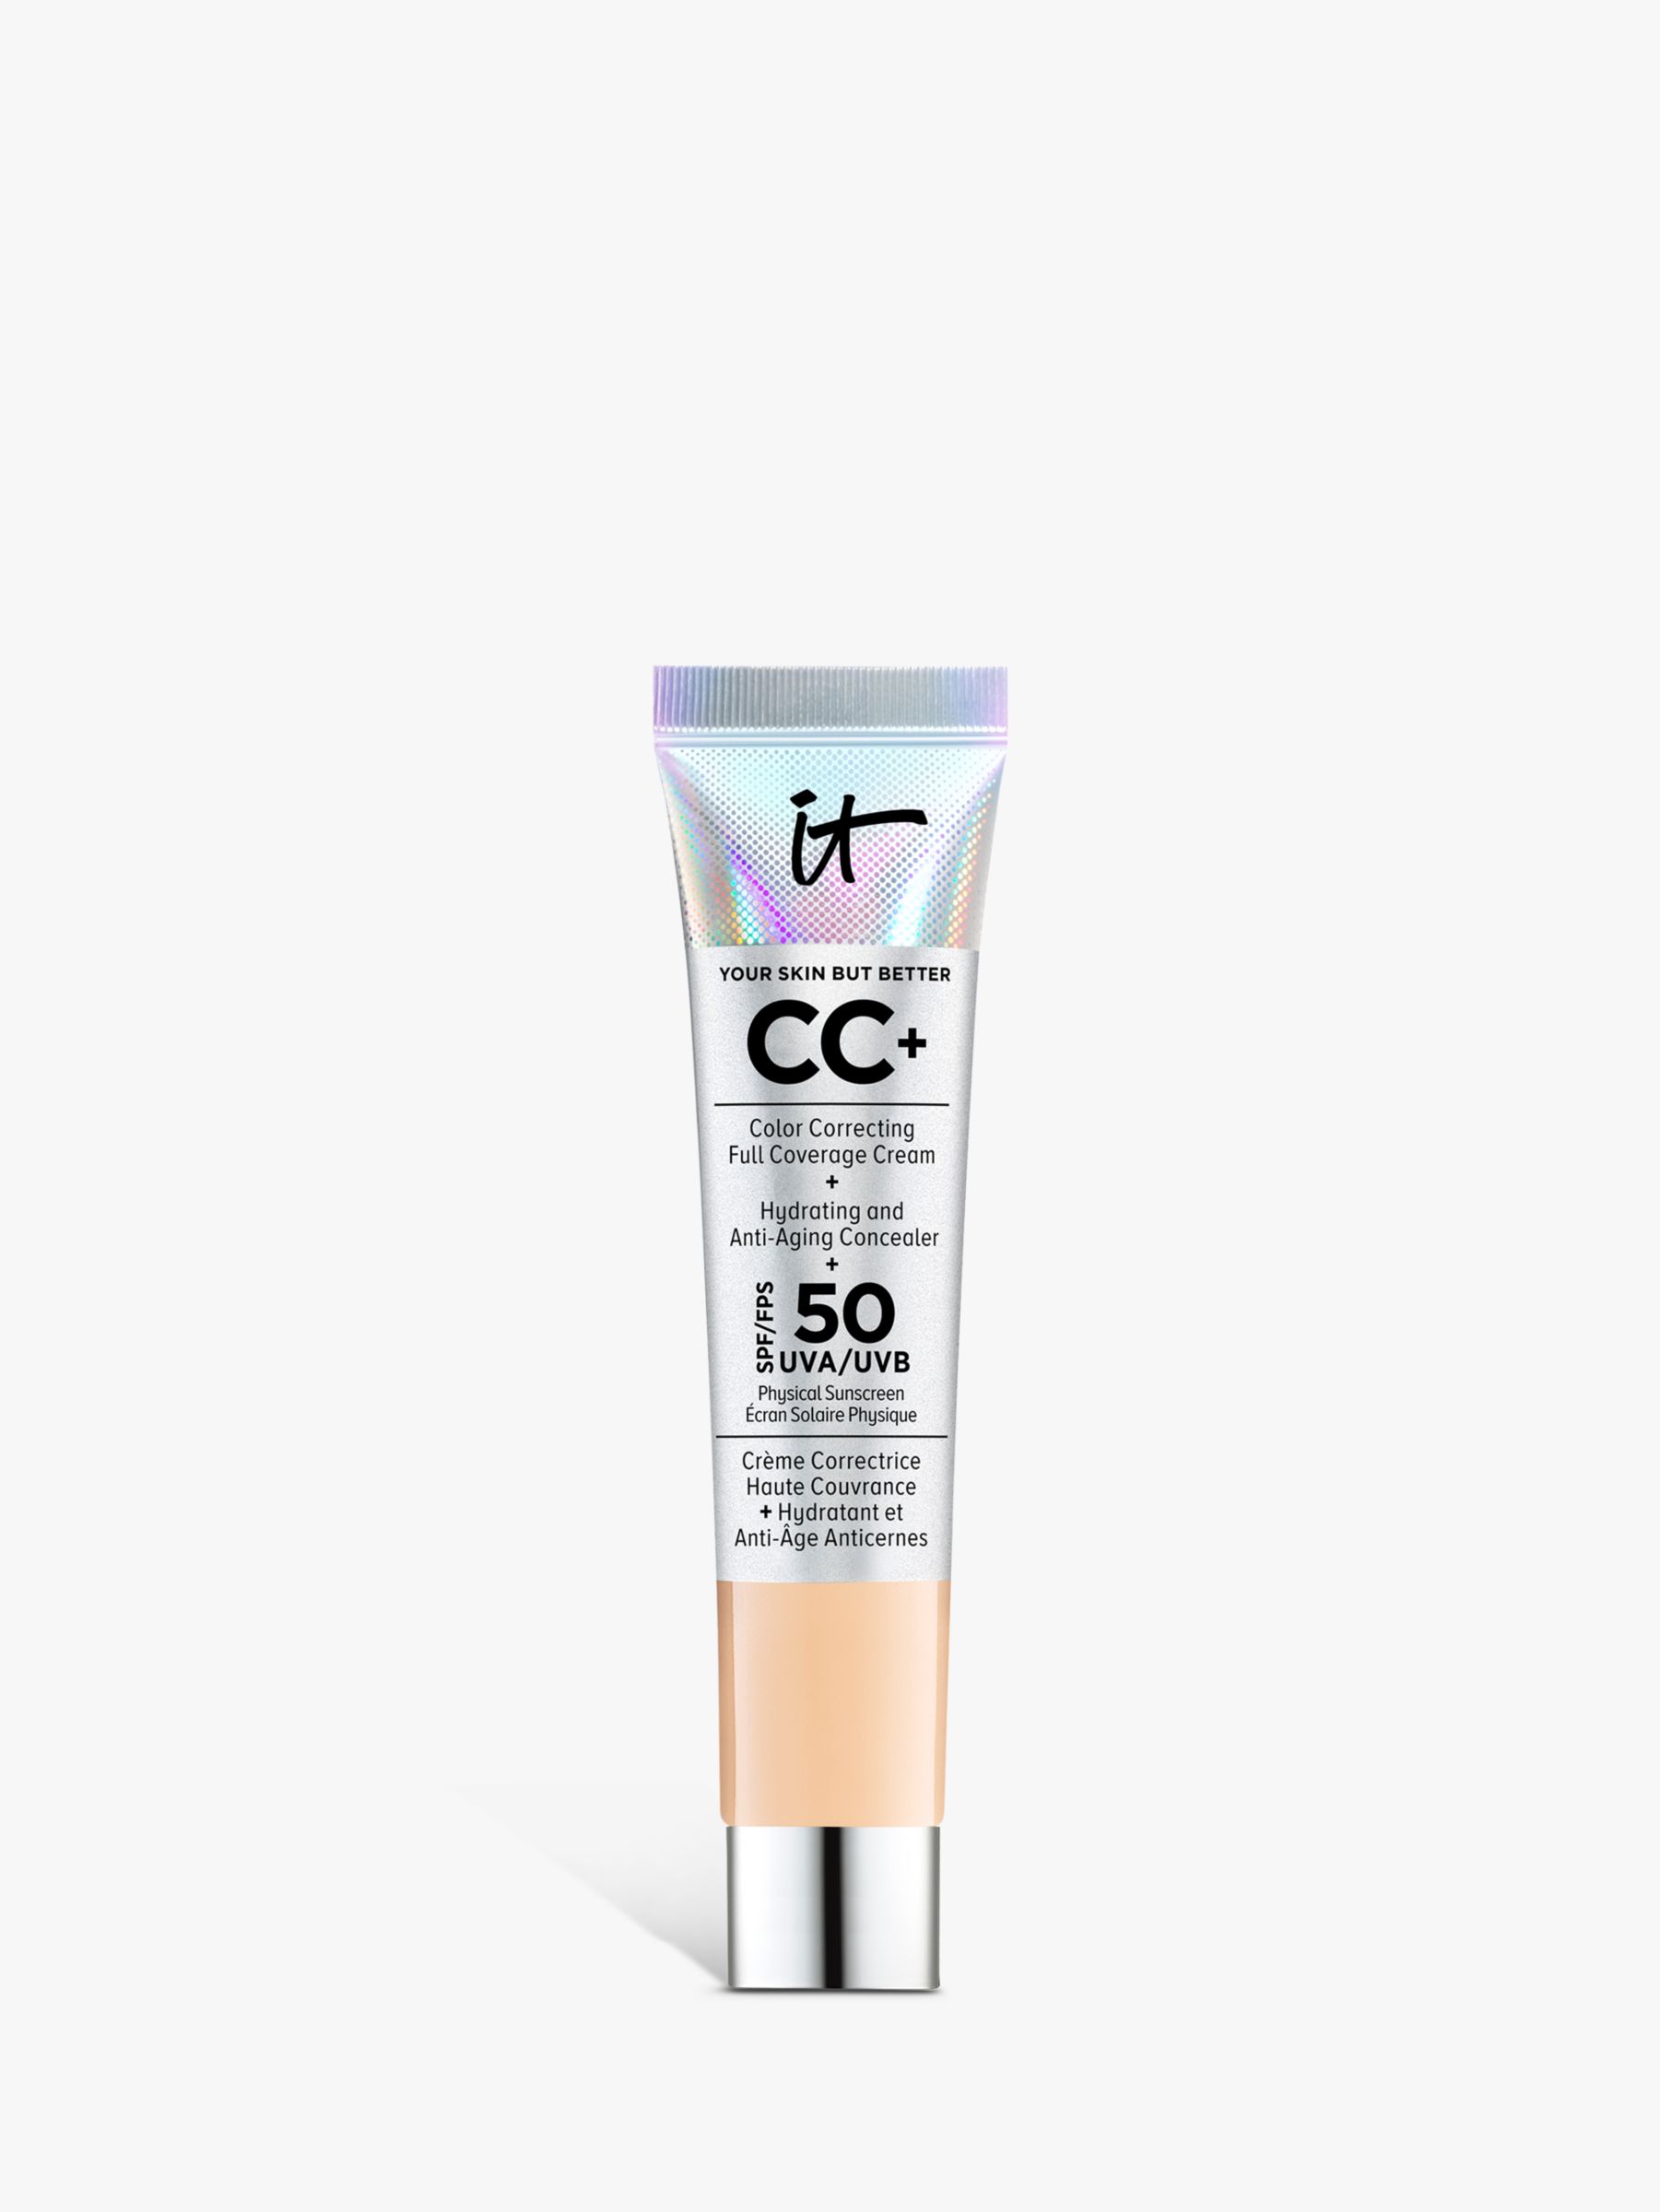 IT Cosmetics Your Skin But Better CC+ Cream with SPF 50 Travel Size, Medium 1